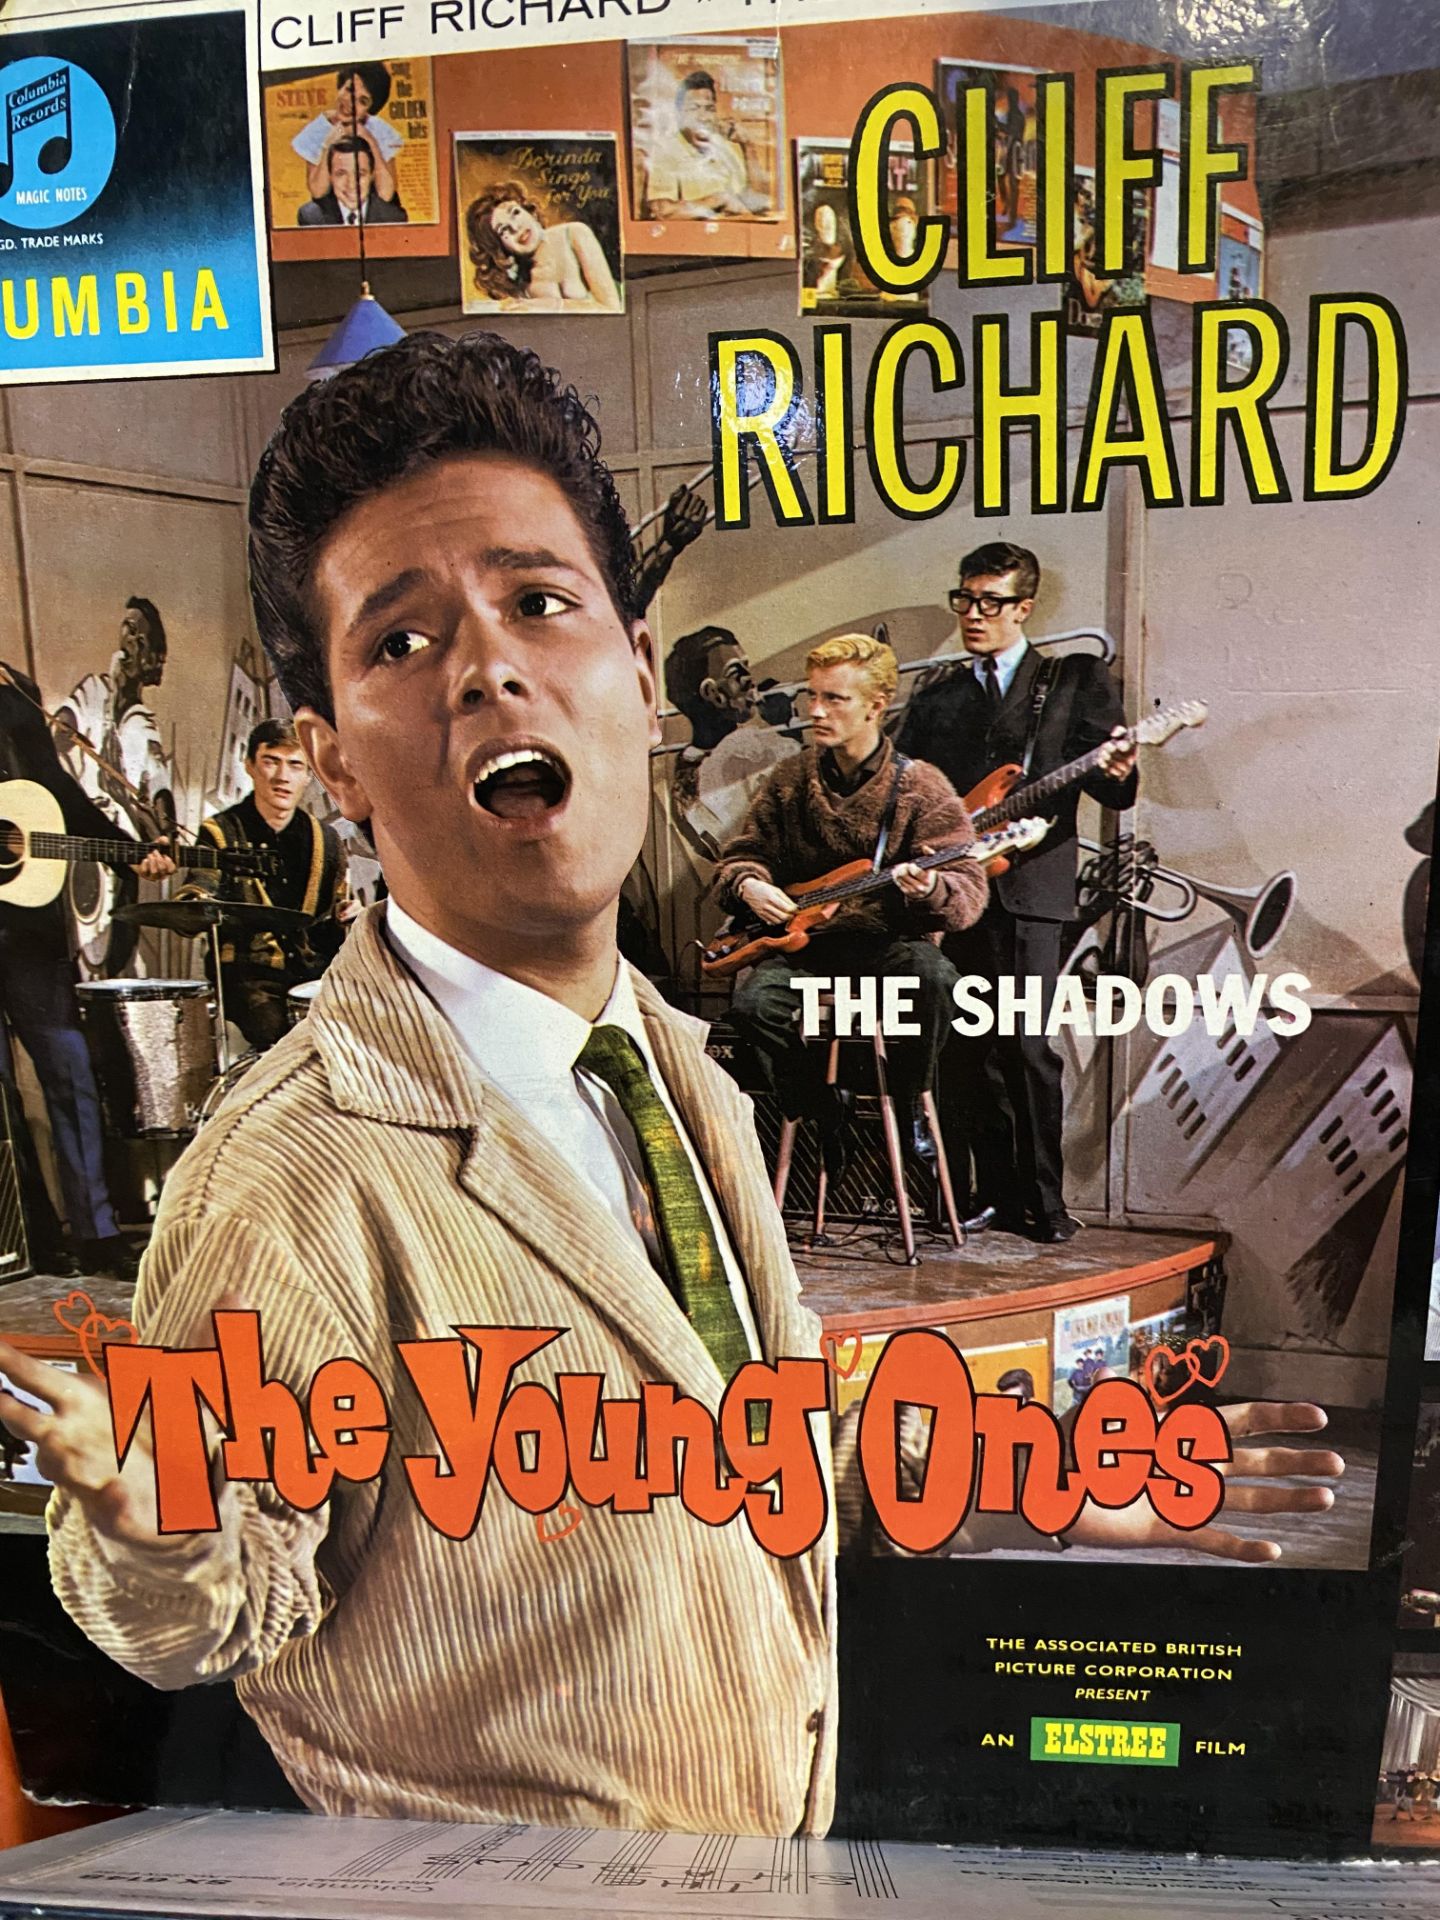 Quantity of LP's Cliff Richard, The Shadows, Dave Clark Five - Image 2 of 4